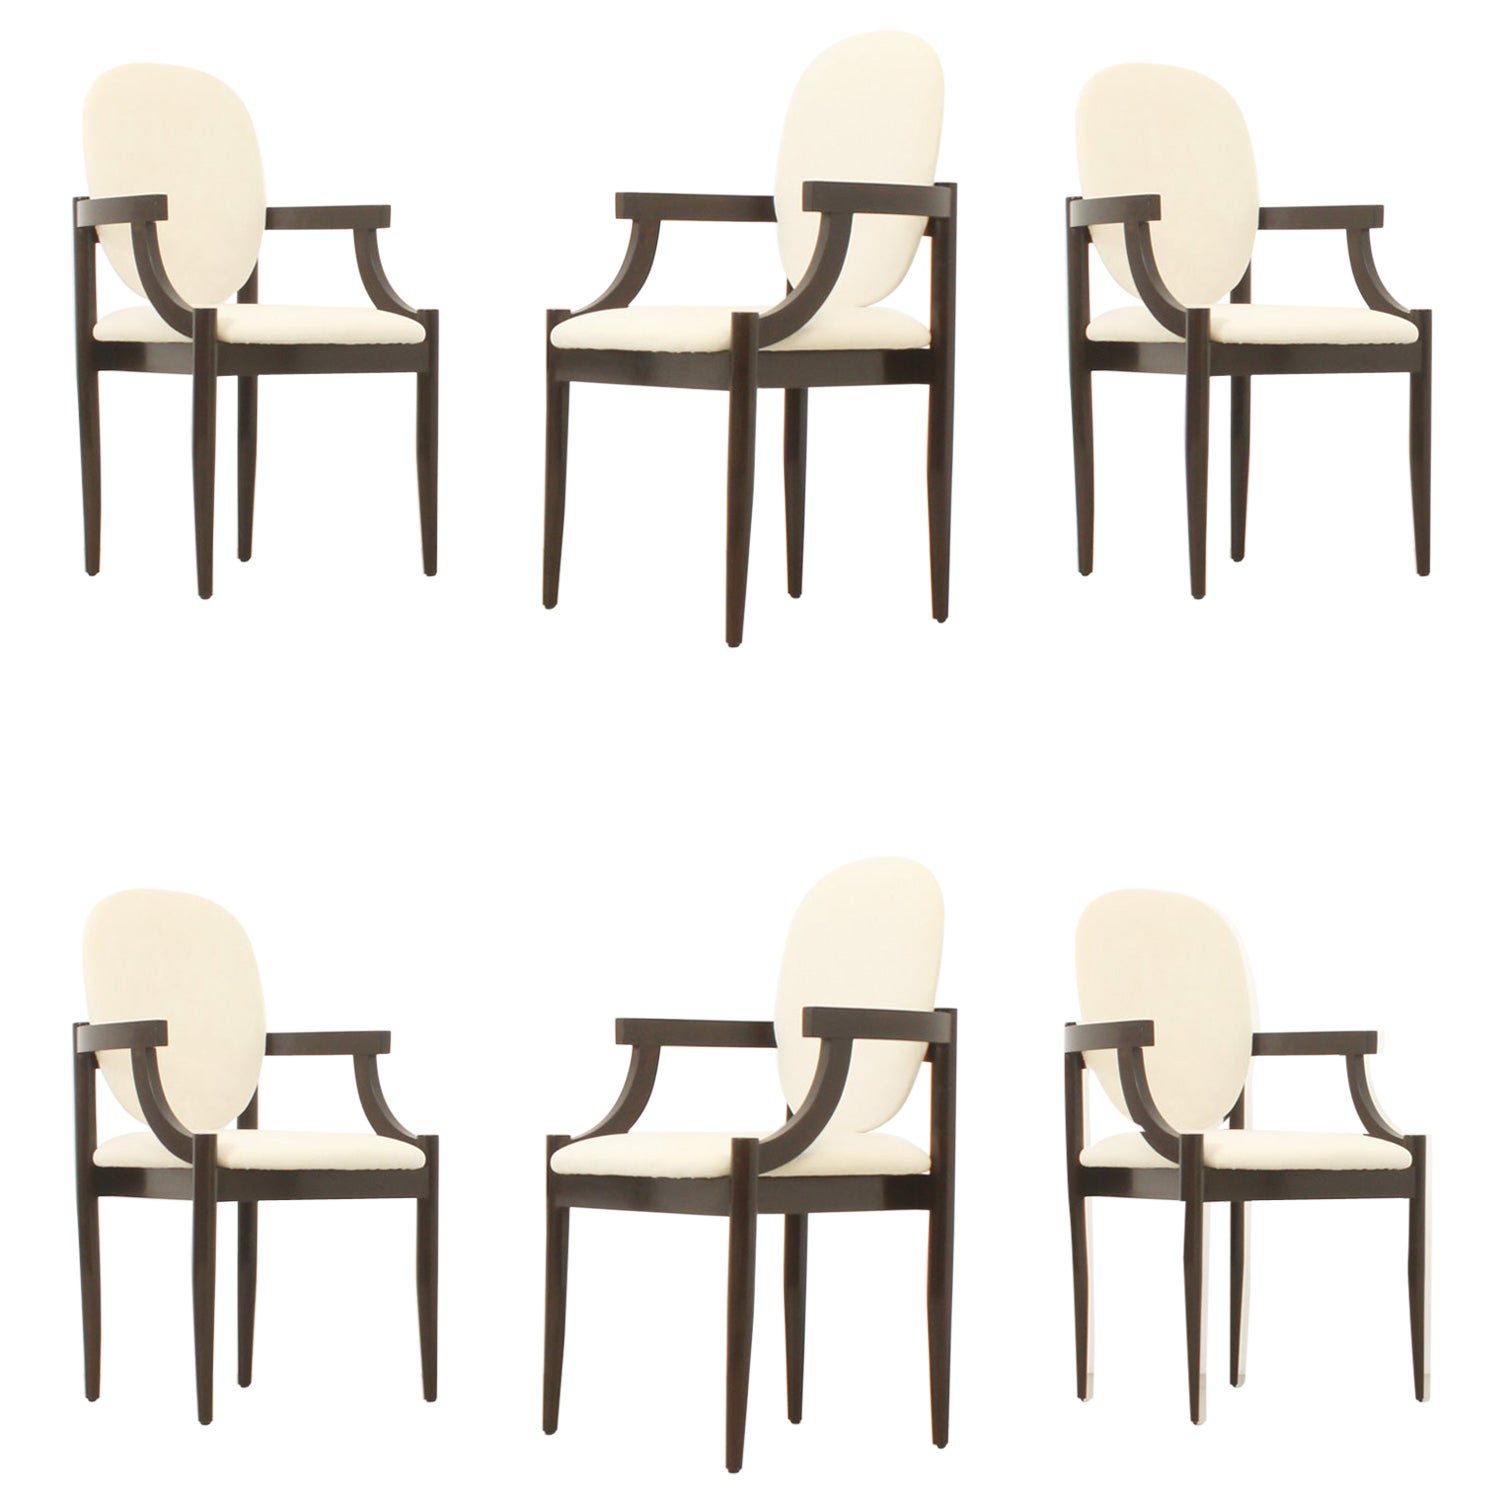 Six Reno Chairs by Spanish Architects Correa & Milá, 1961 For Sale